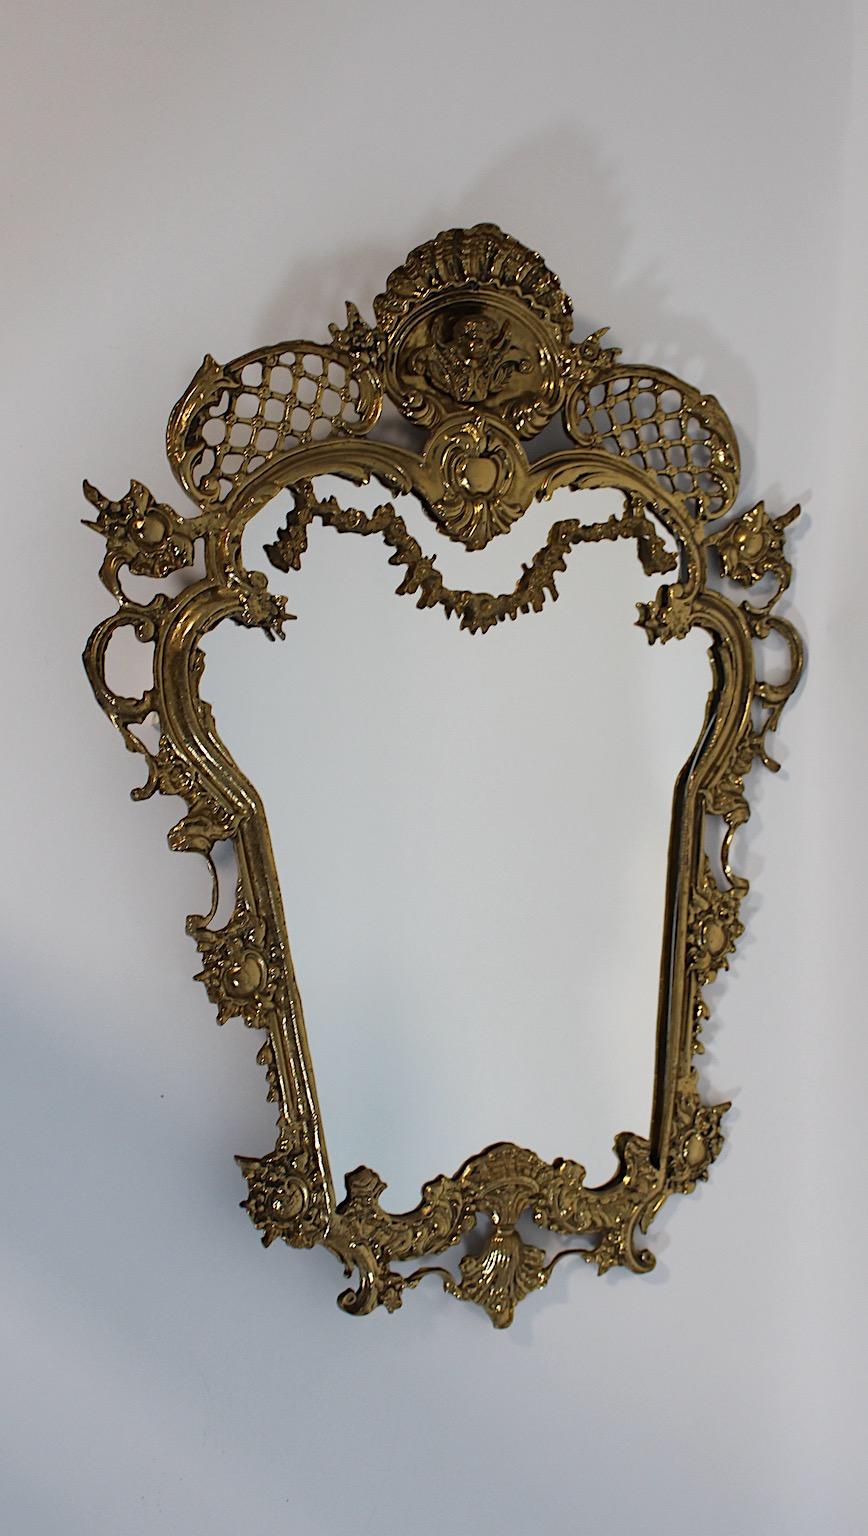 Modern Vintage Brass Wall Mirror Style Baroque Revival Italy 1970s For Sale 2